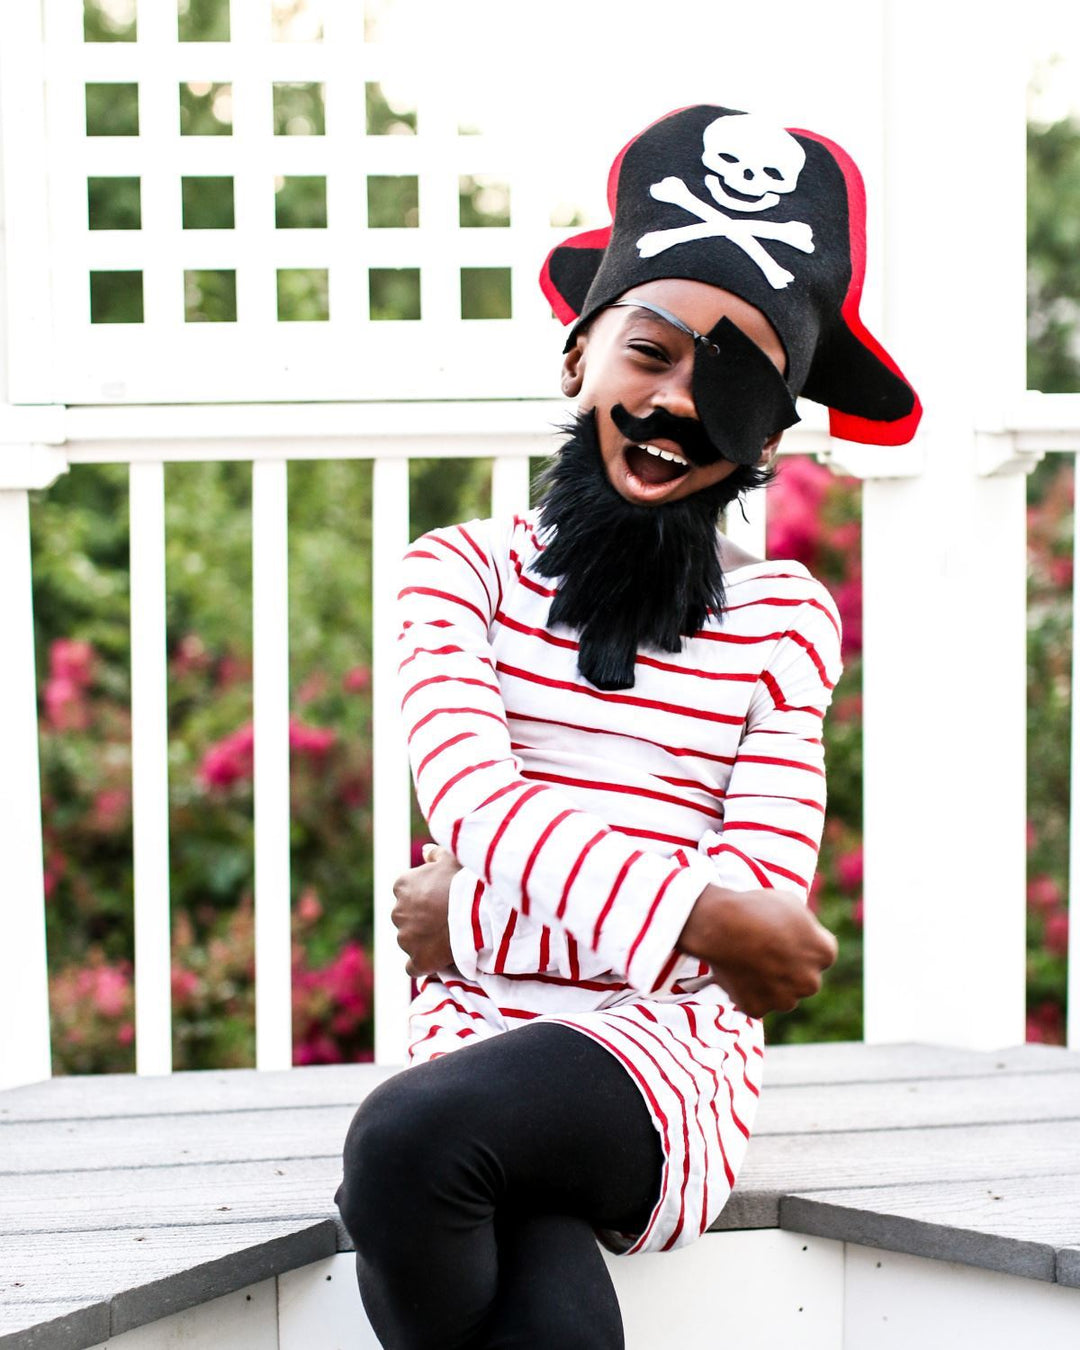 How To Make a Pirate Hat